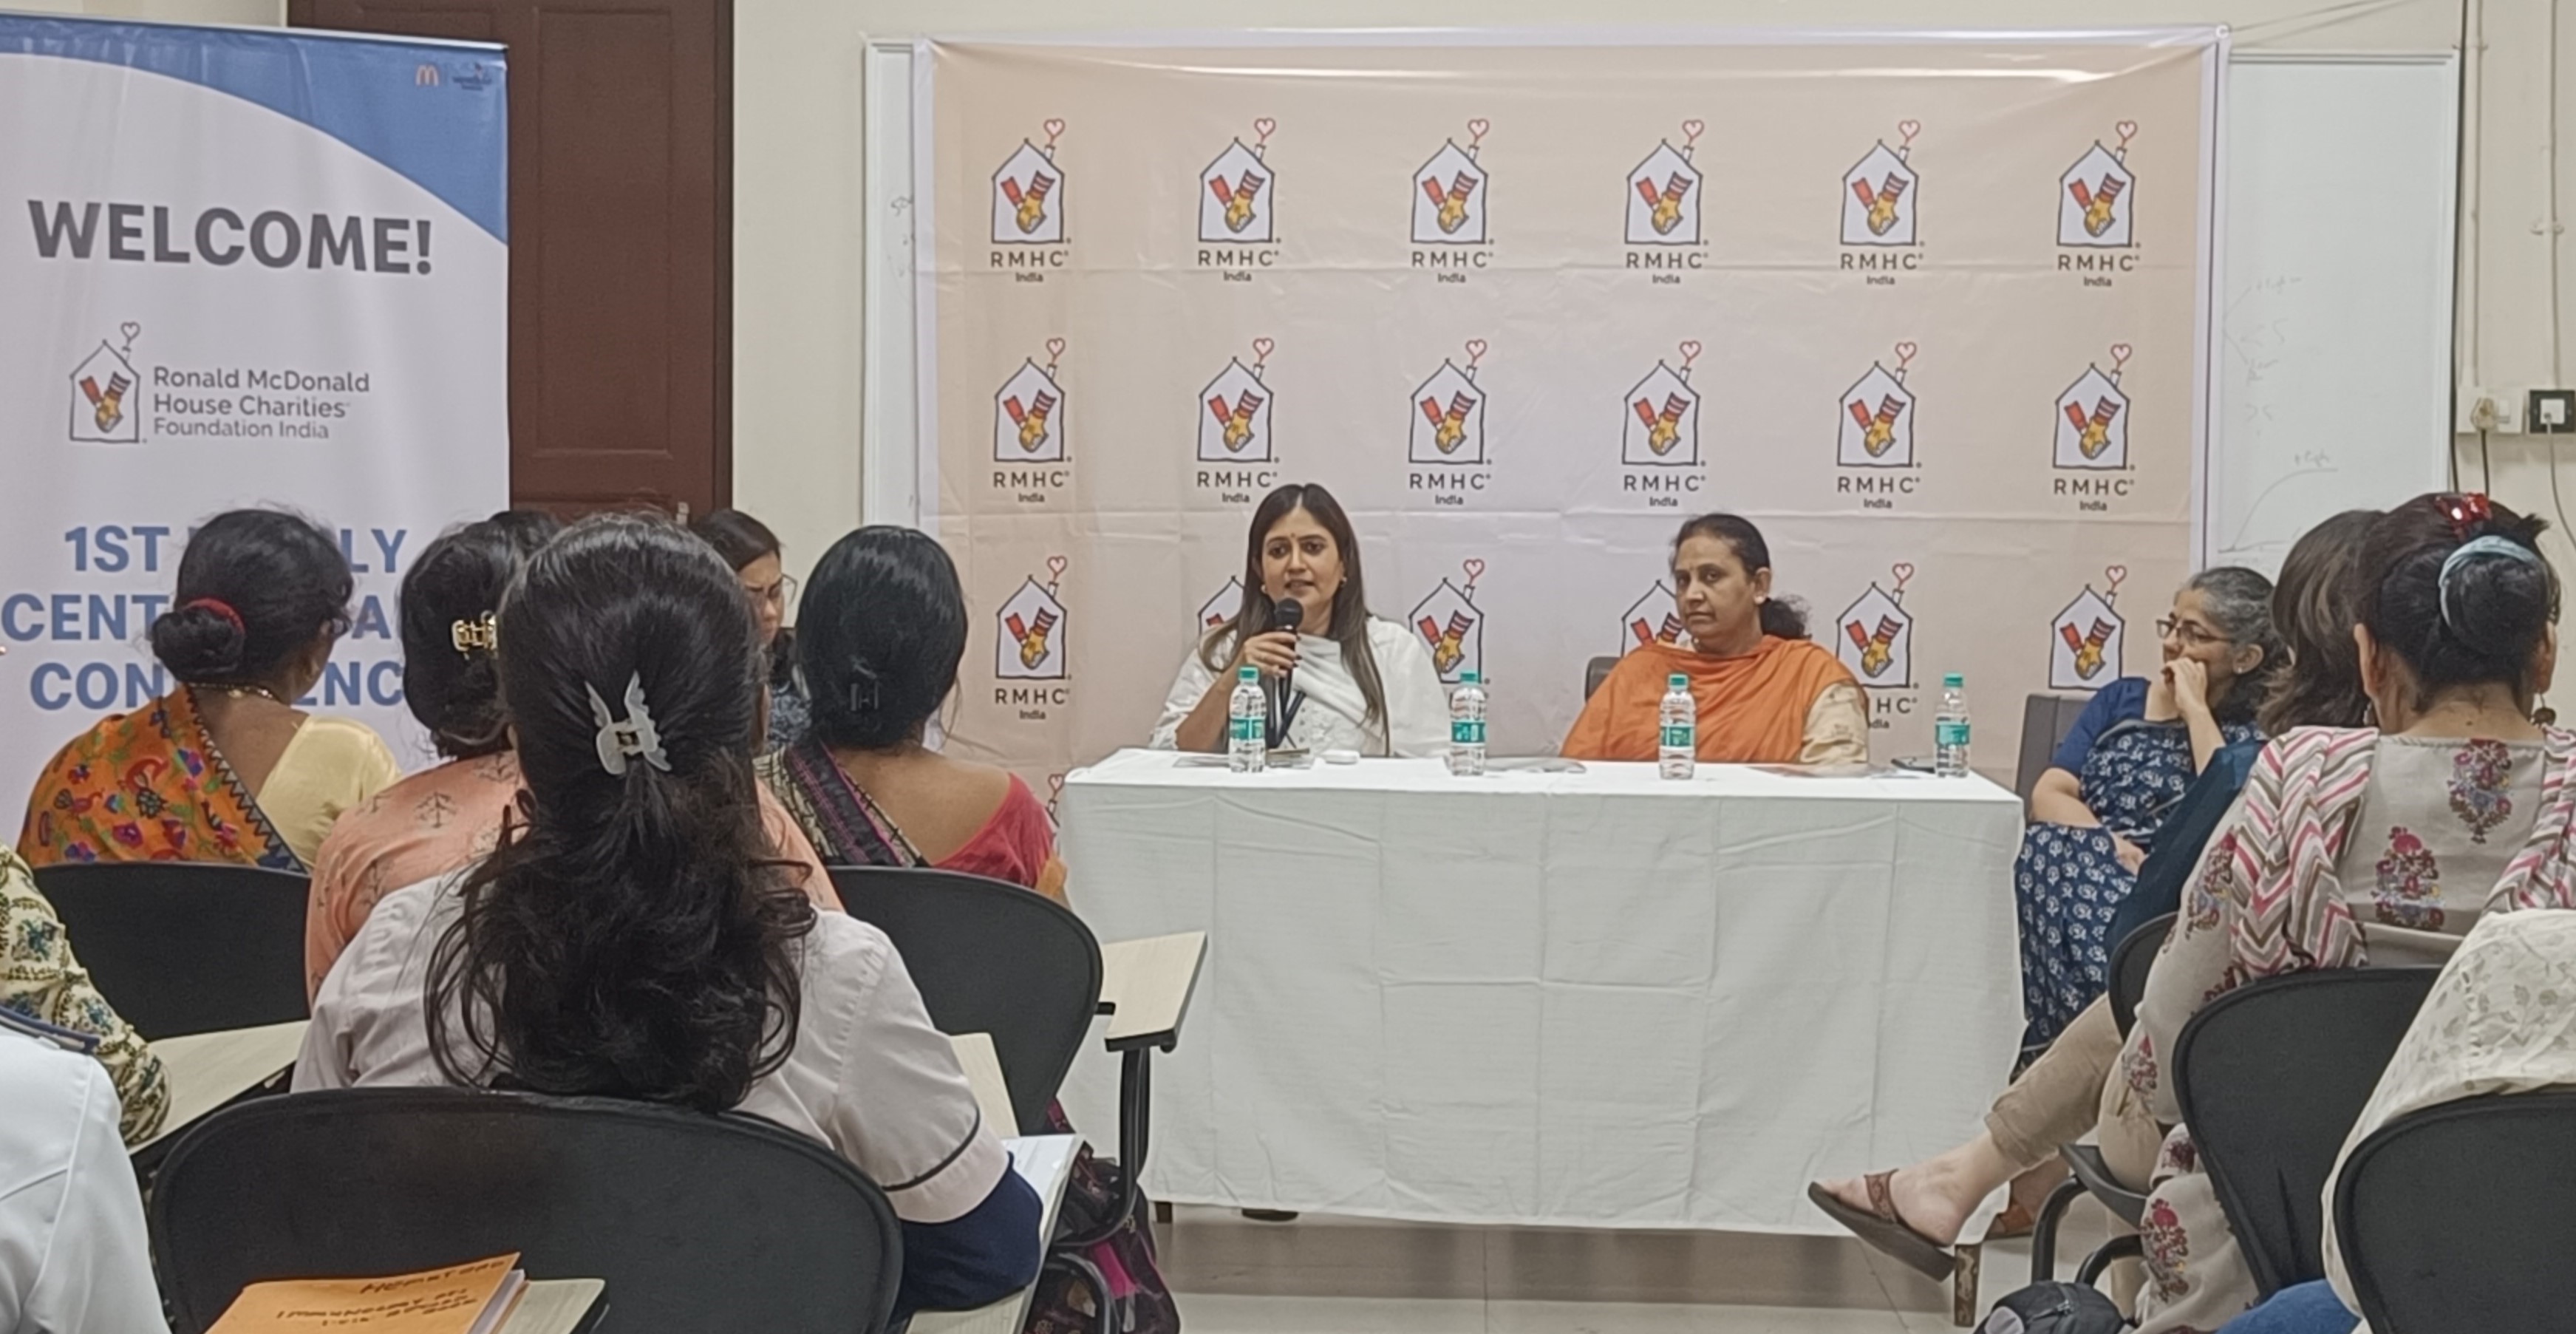 Ronald McDonald House Charities (RMHC) India hosts its first Care Conference to raise awareness about cancer stigma in our society